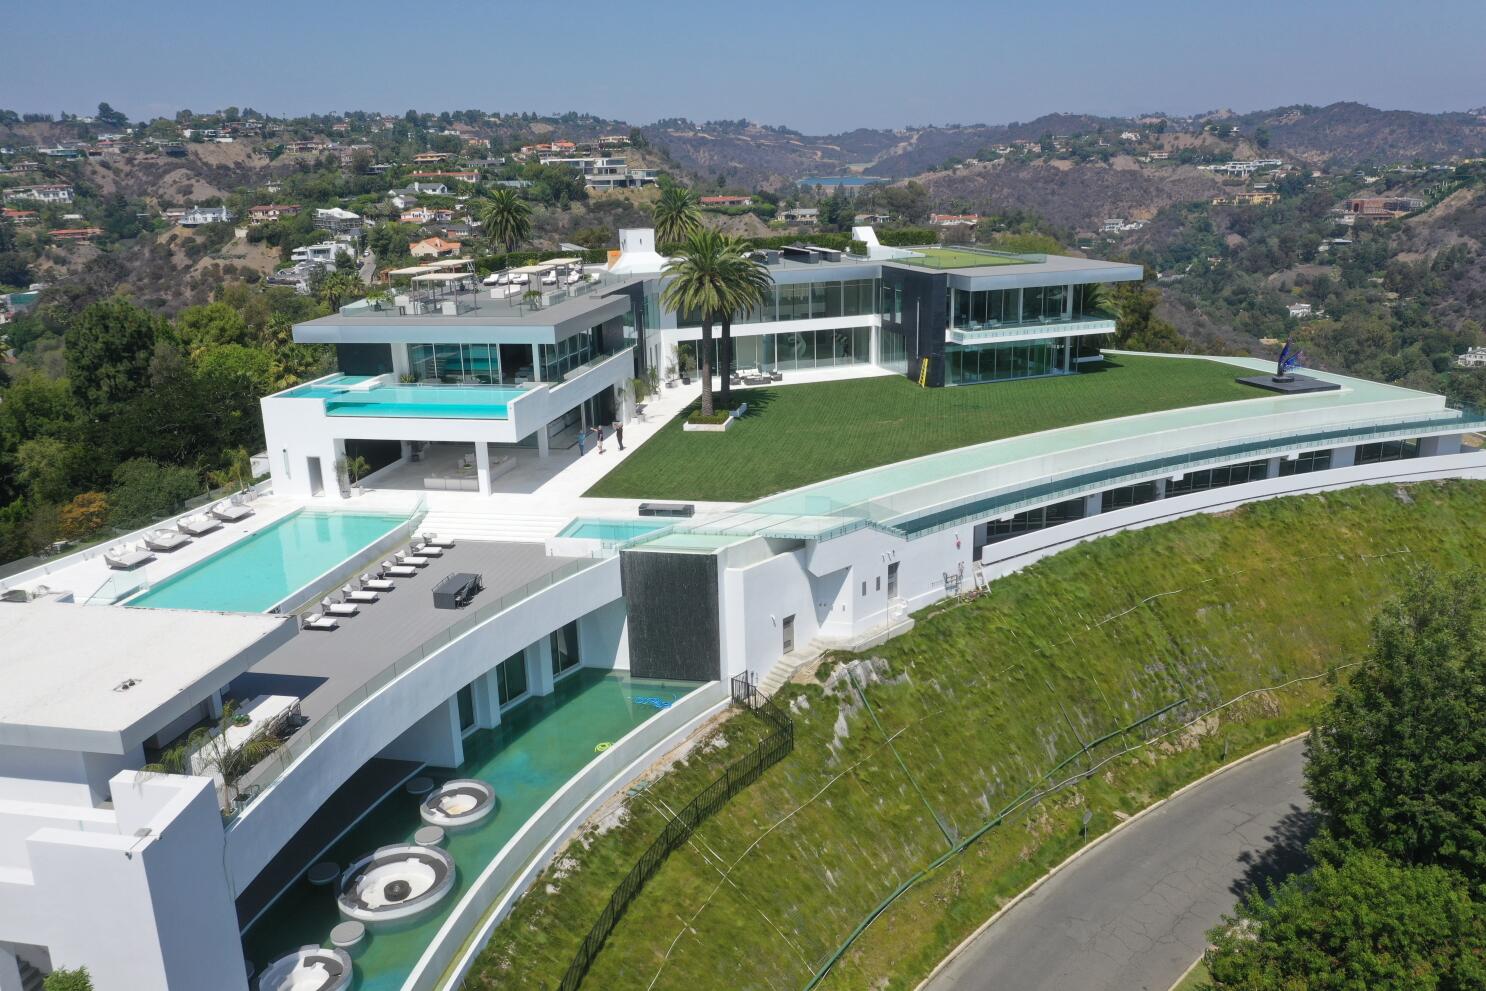 America's most expensive home is on sale for $250 million